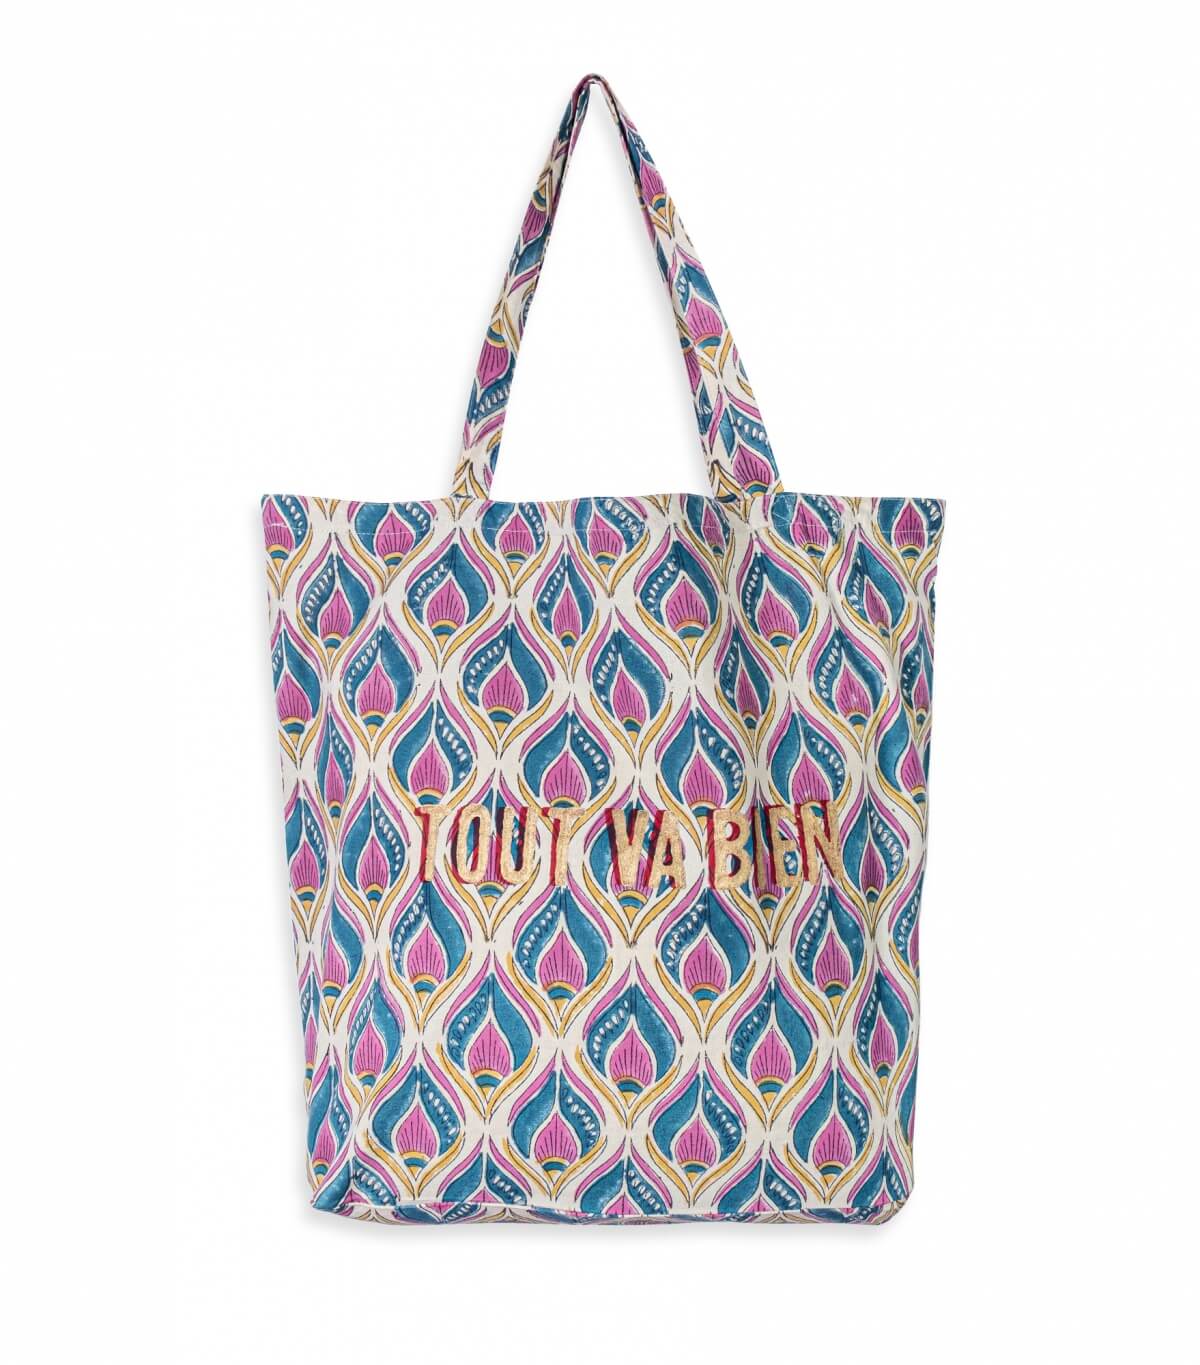 Indian shopping bag 16x18x5 inches - pink